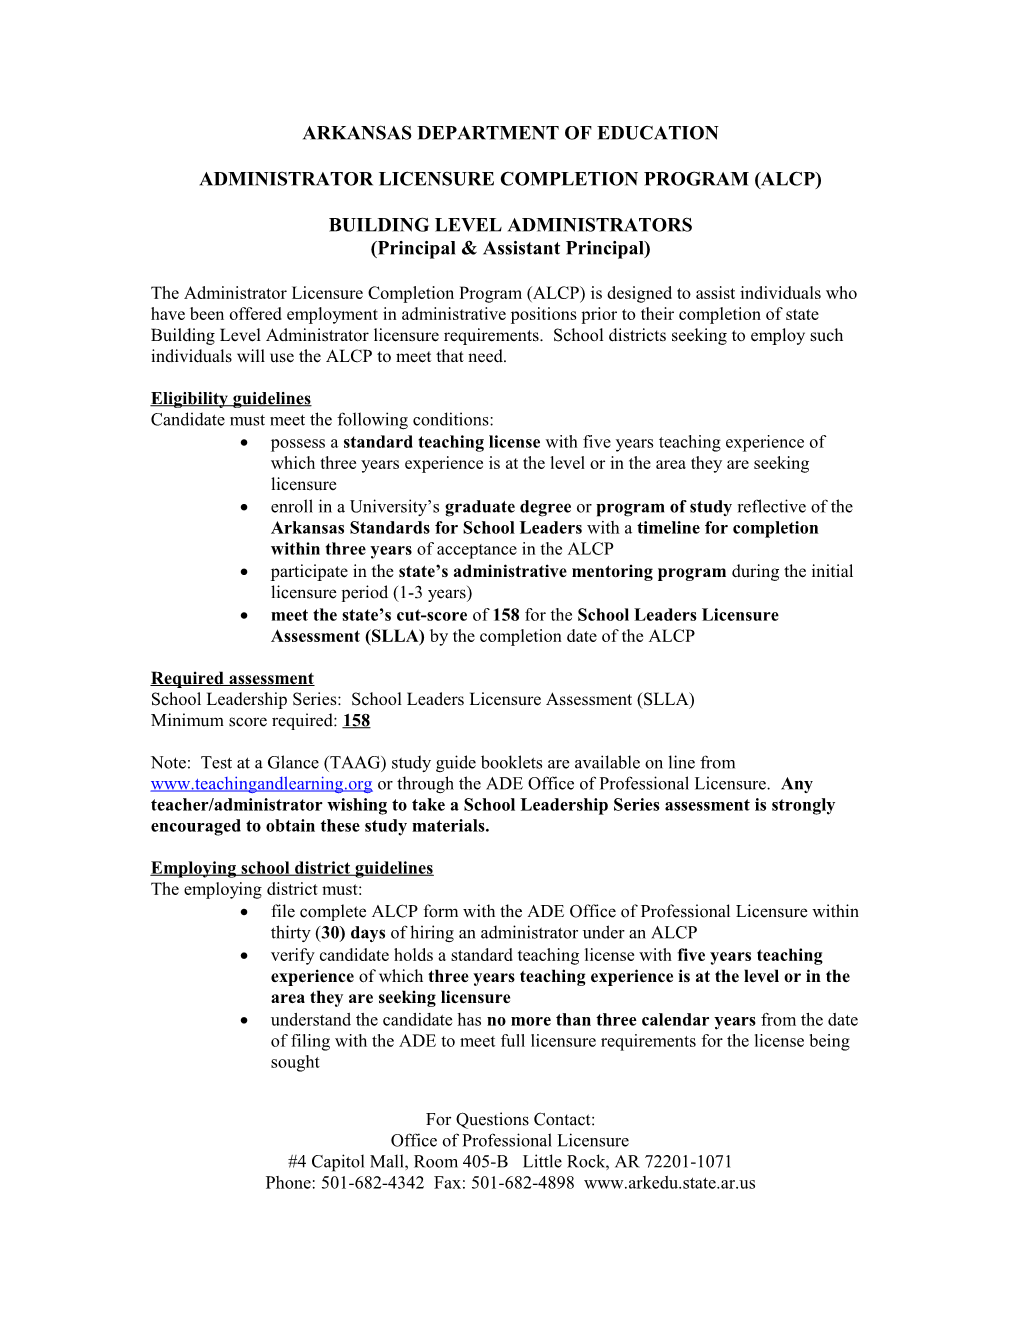 Administrator Licensure Completion Program (Alcp)